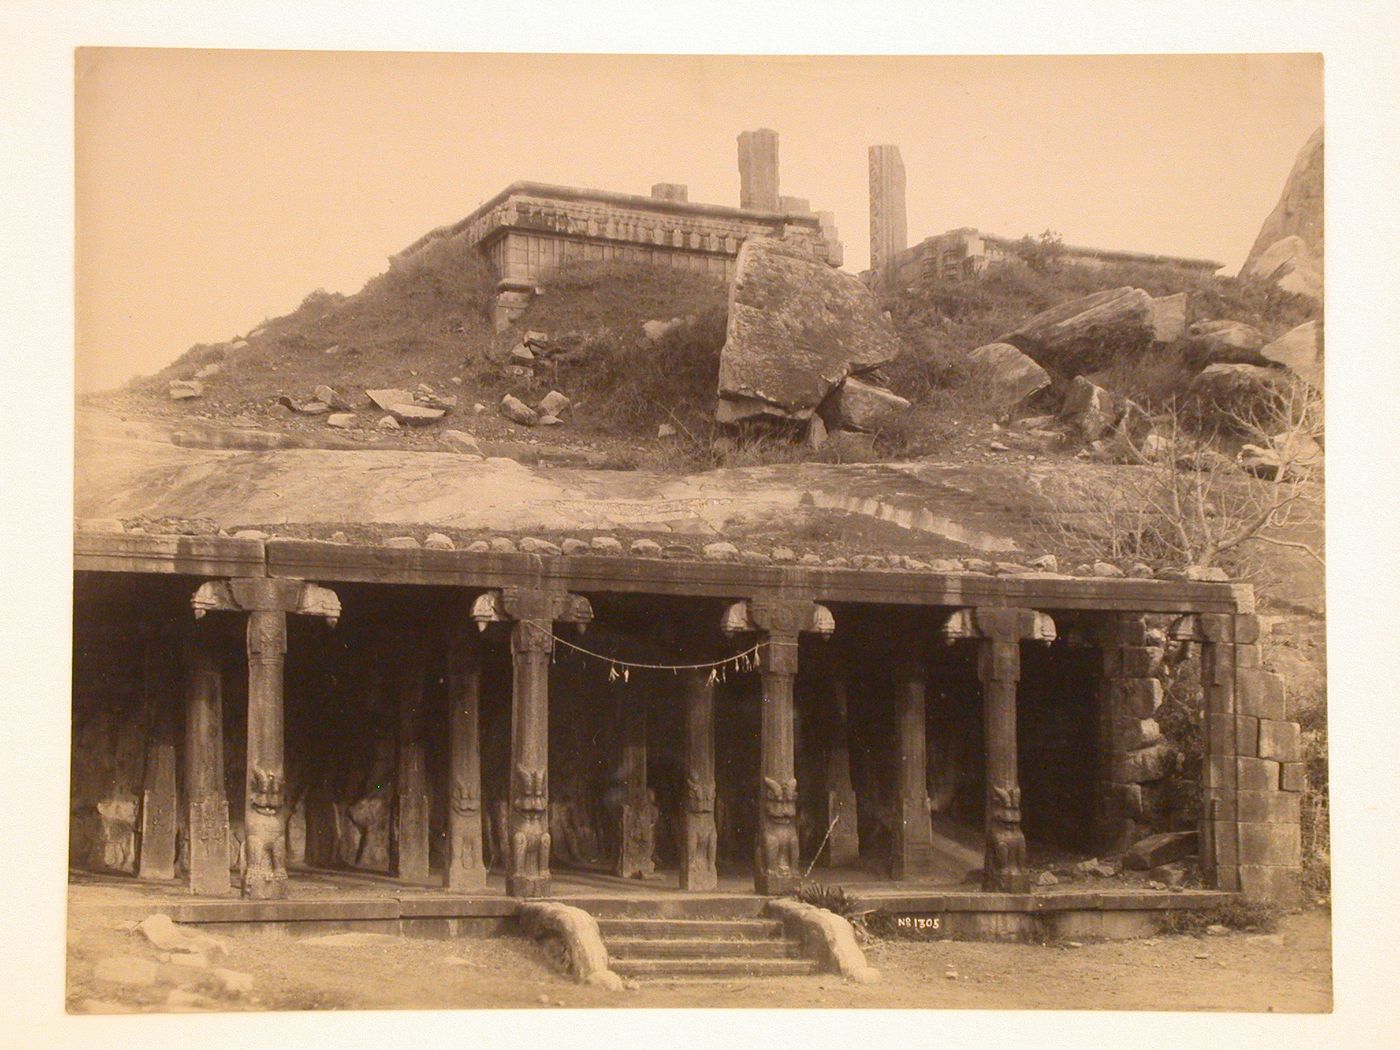 View of a columned entrance to a temple or a hypostyle hall, also showing ruins of a temple above, India